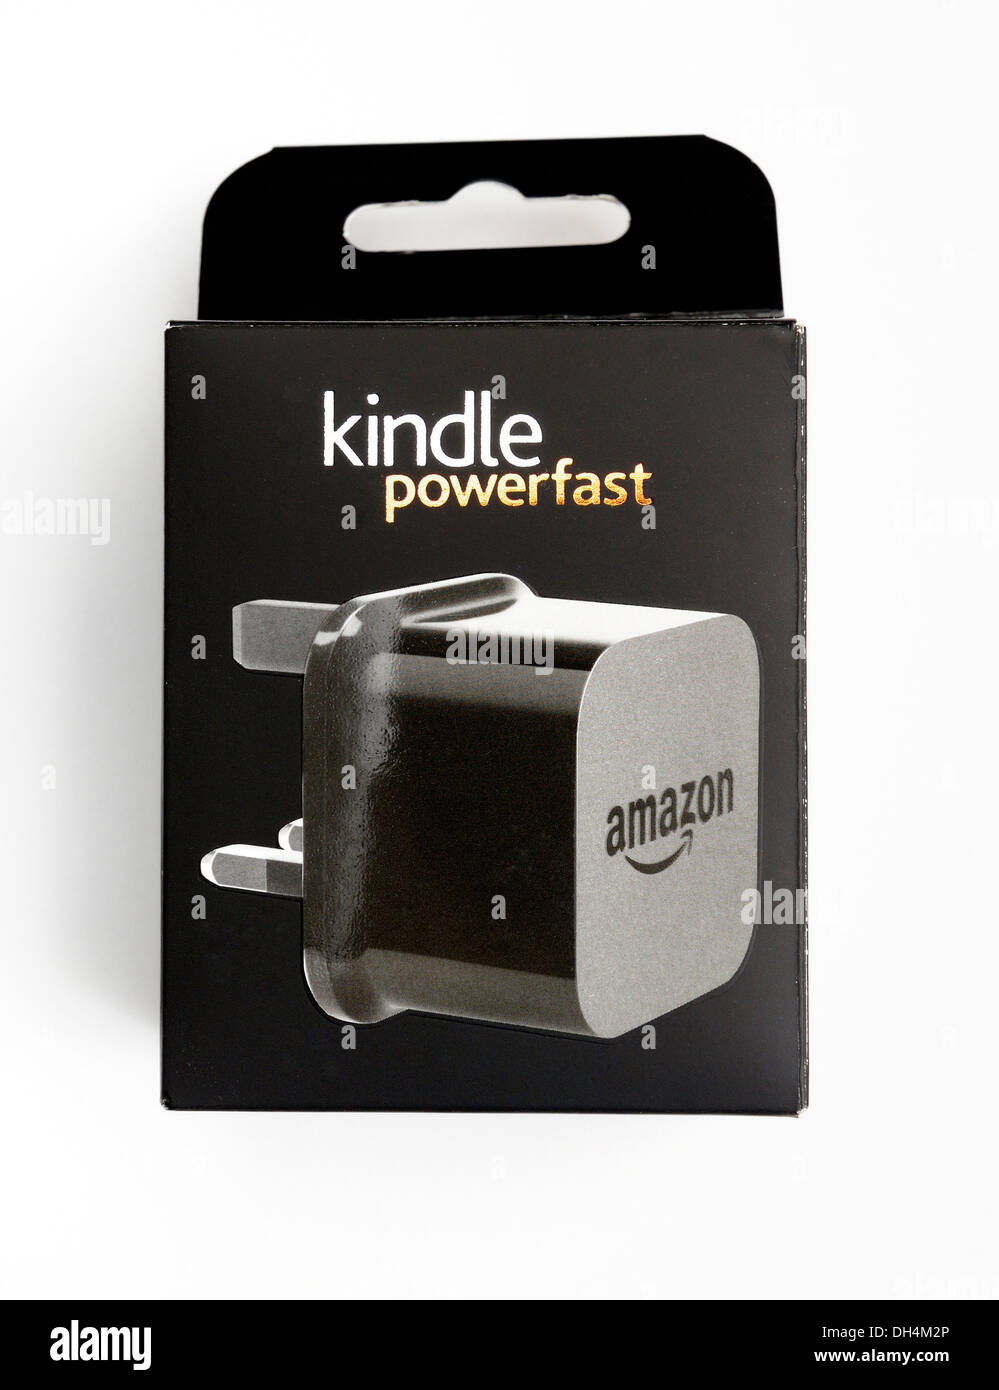 A kindle powerfast mains charger Stock Photo